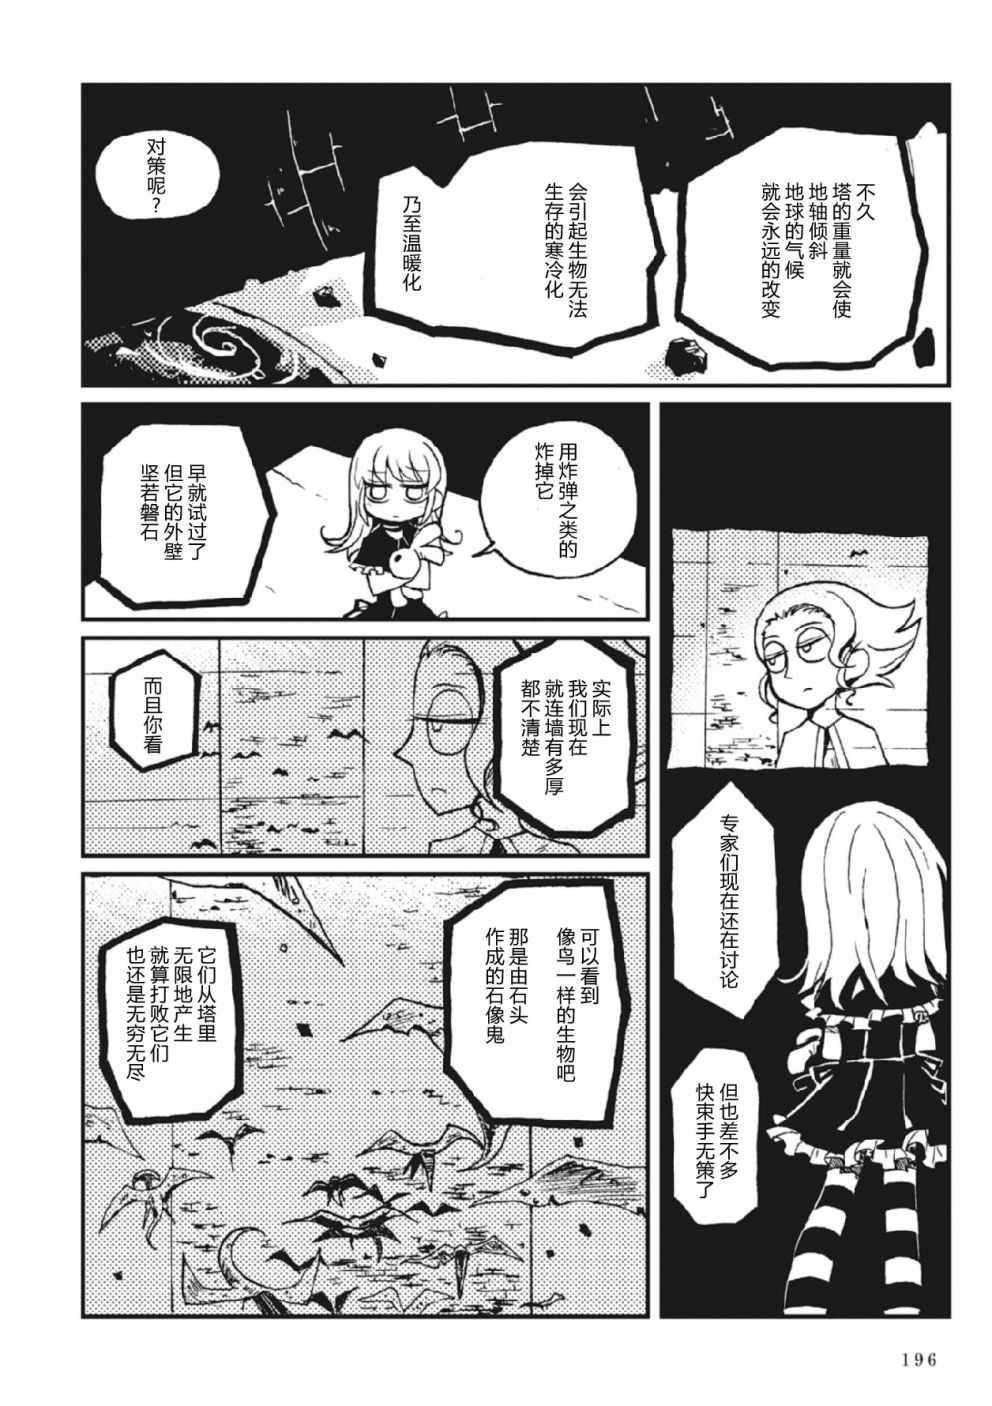 《Spectral Wizard》漫画 003集